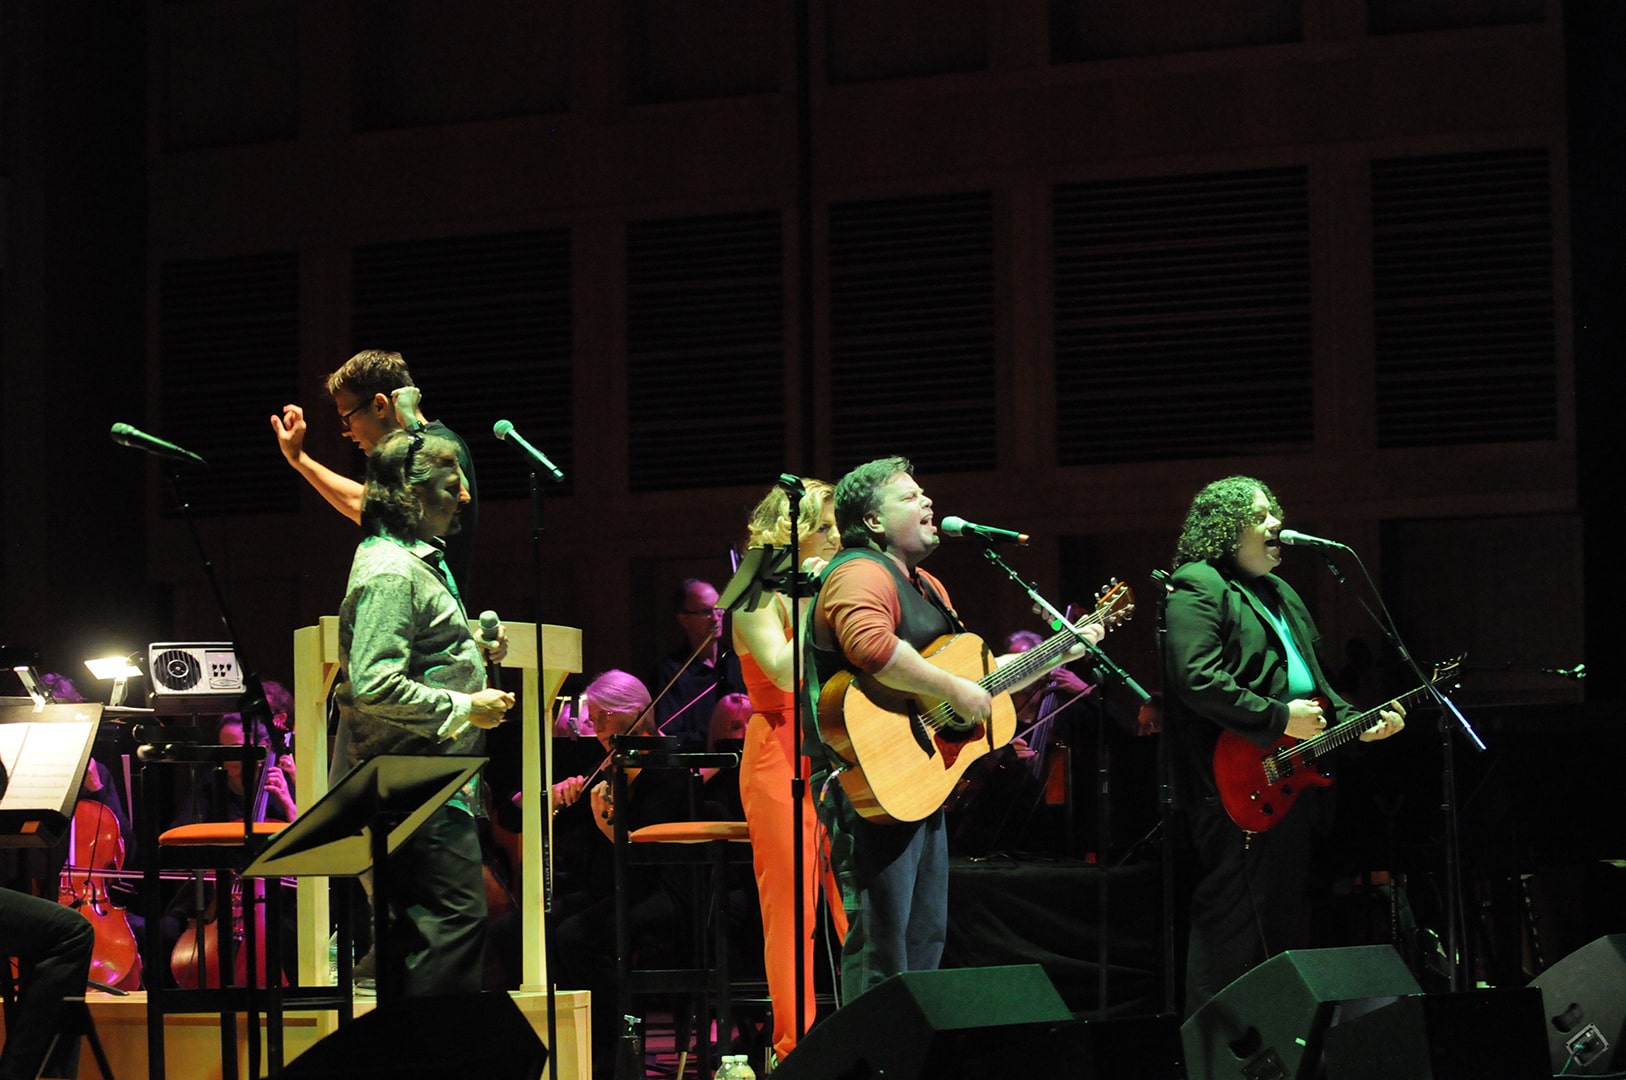 The Classic Rock Orchestra performs on stage.